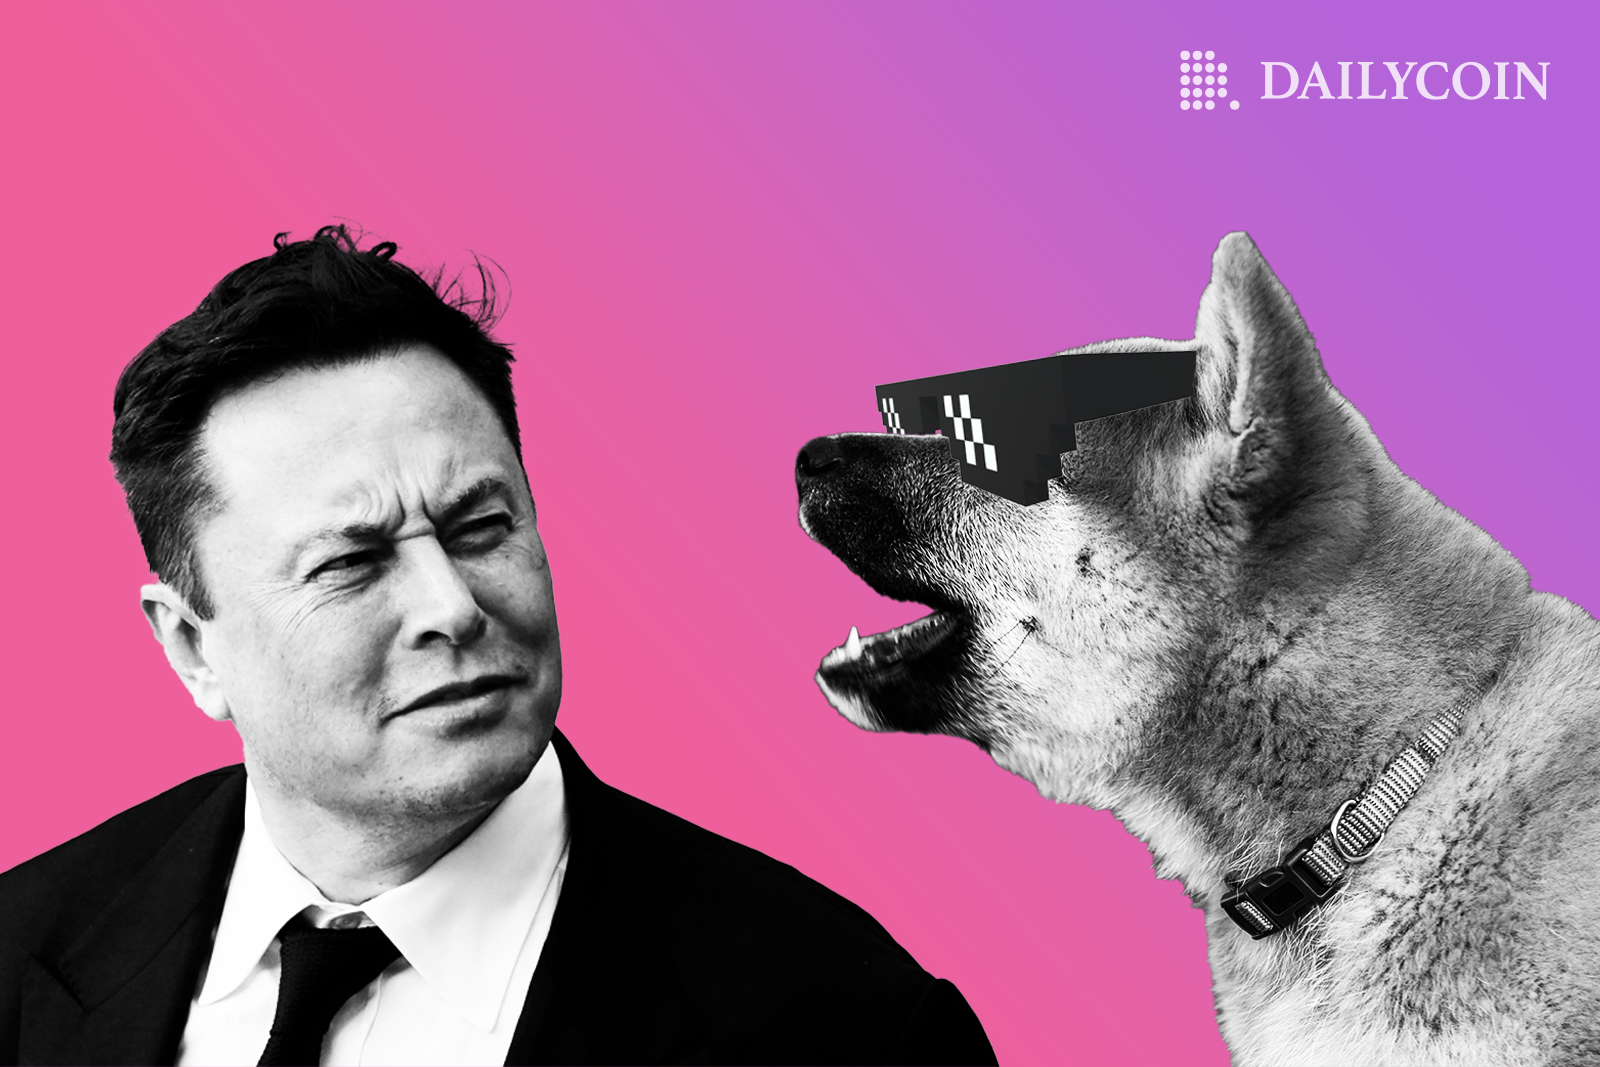 Elon Musk confused staring at Shiba Inu with sunglasses on